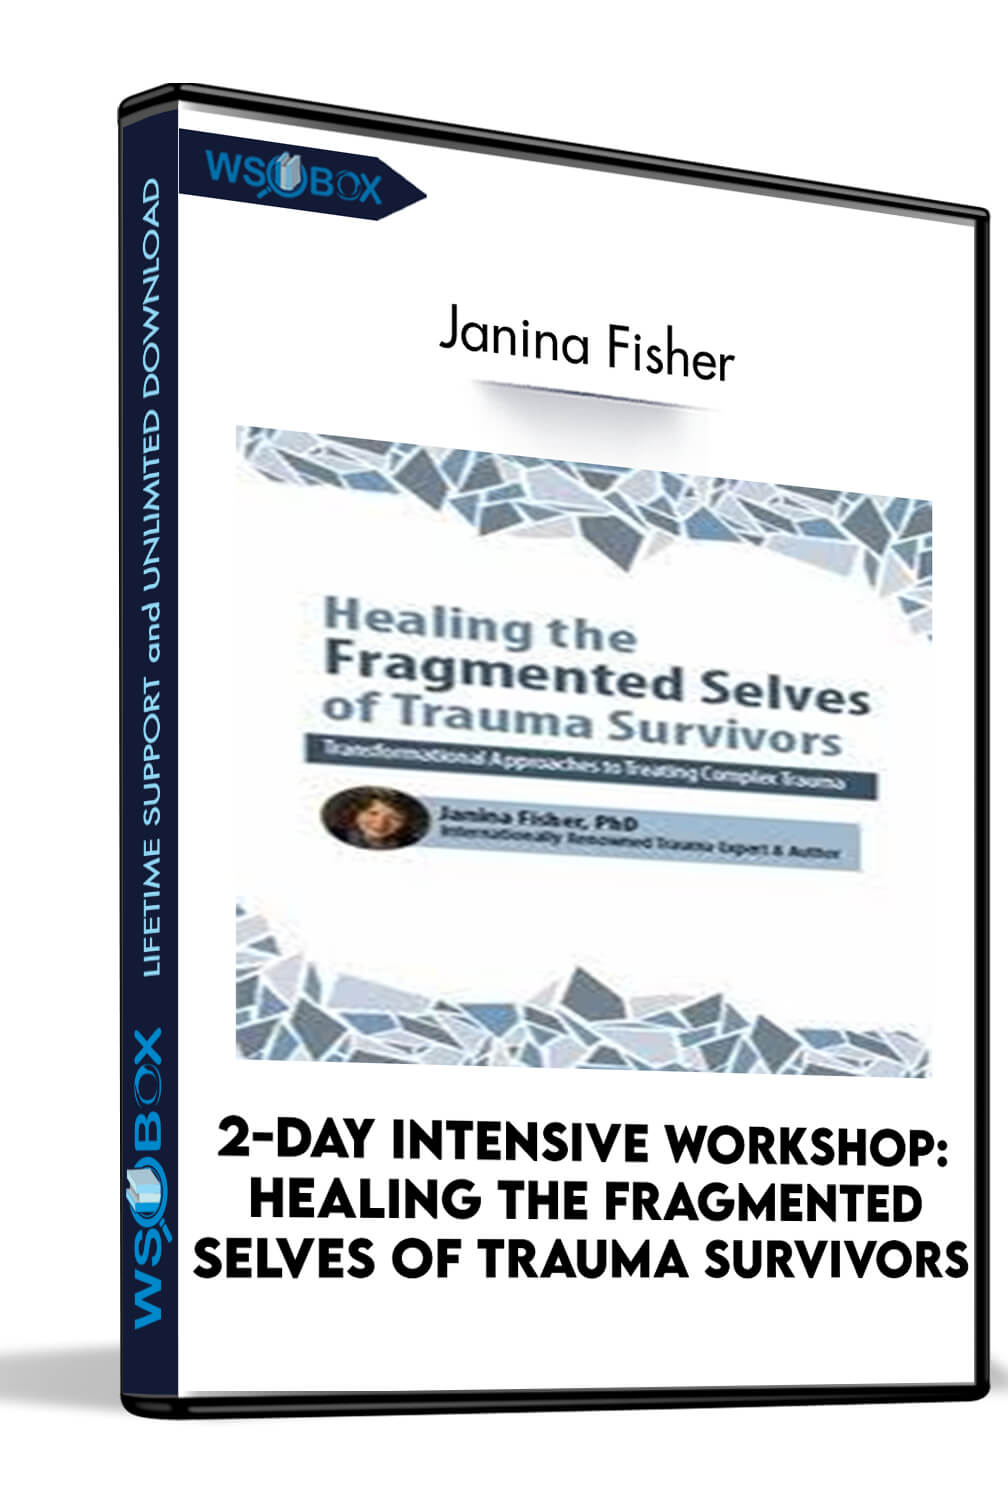 2-Day Intensive Workshop: Healing the Fragmented Selves of Trauma Survivors: Transformational Approaches to Treating Complex Trauma – Janina Fisher